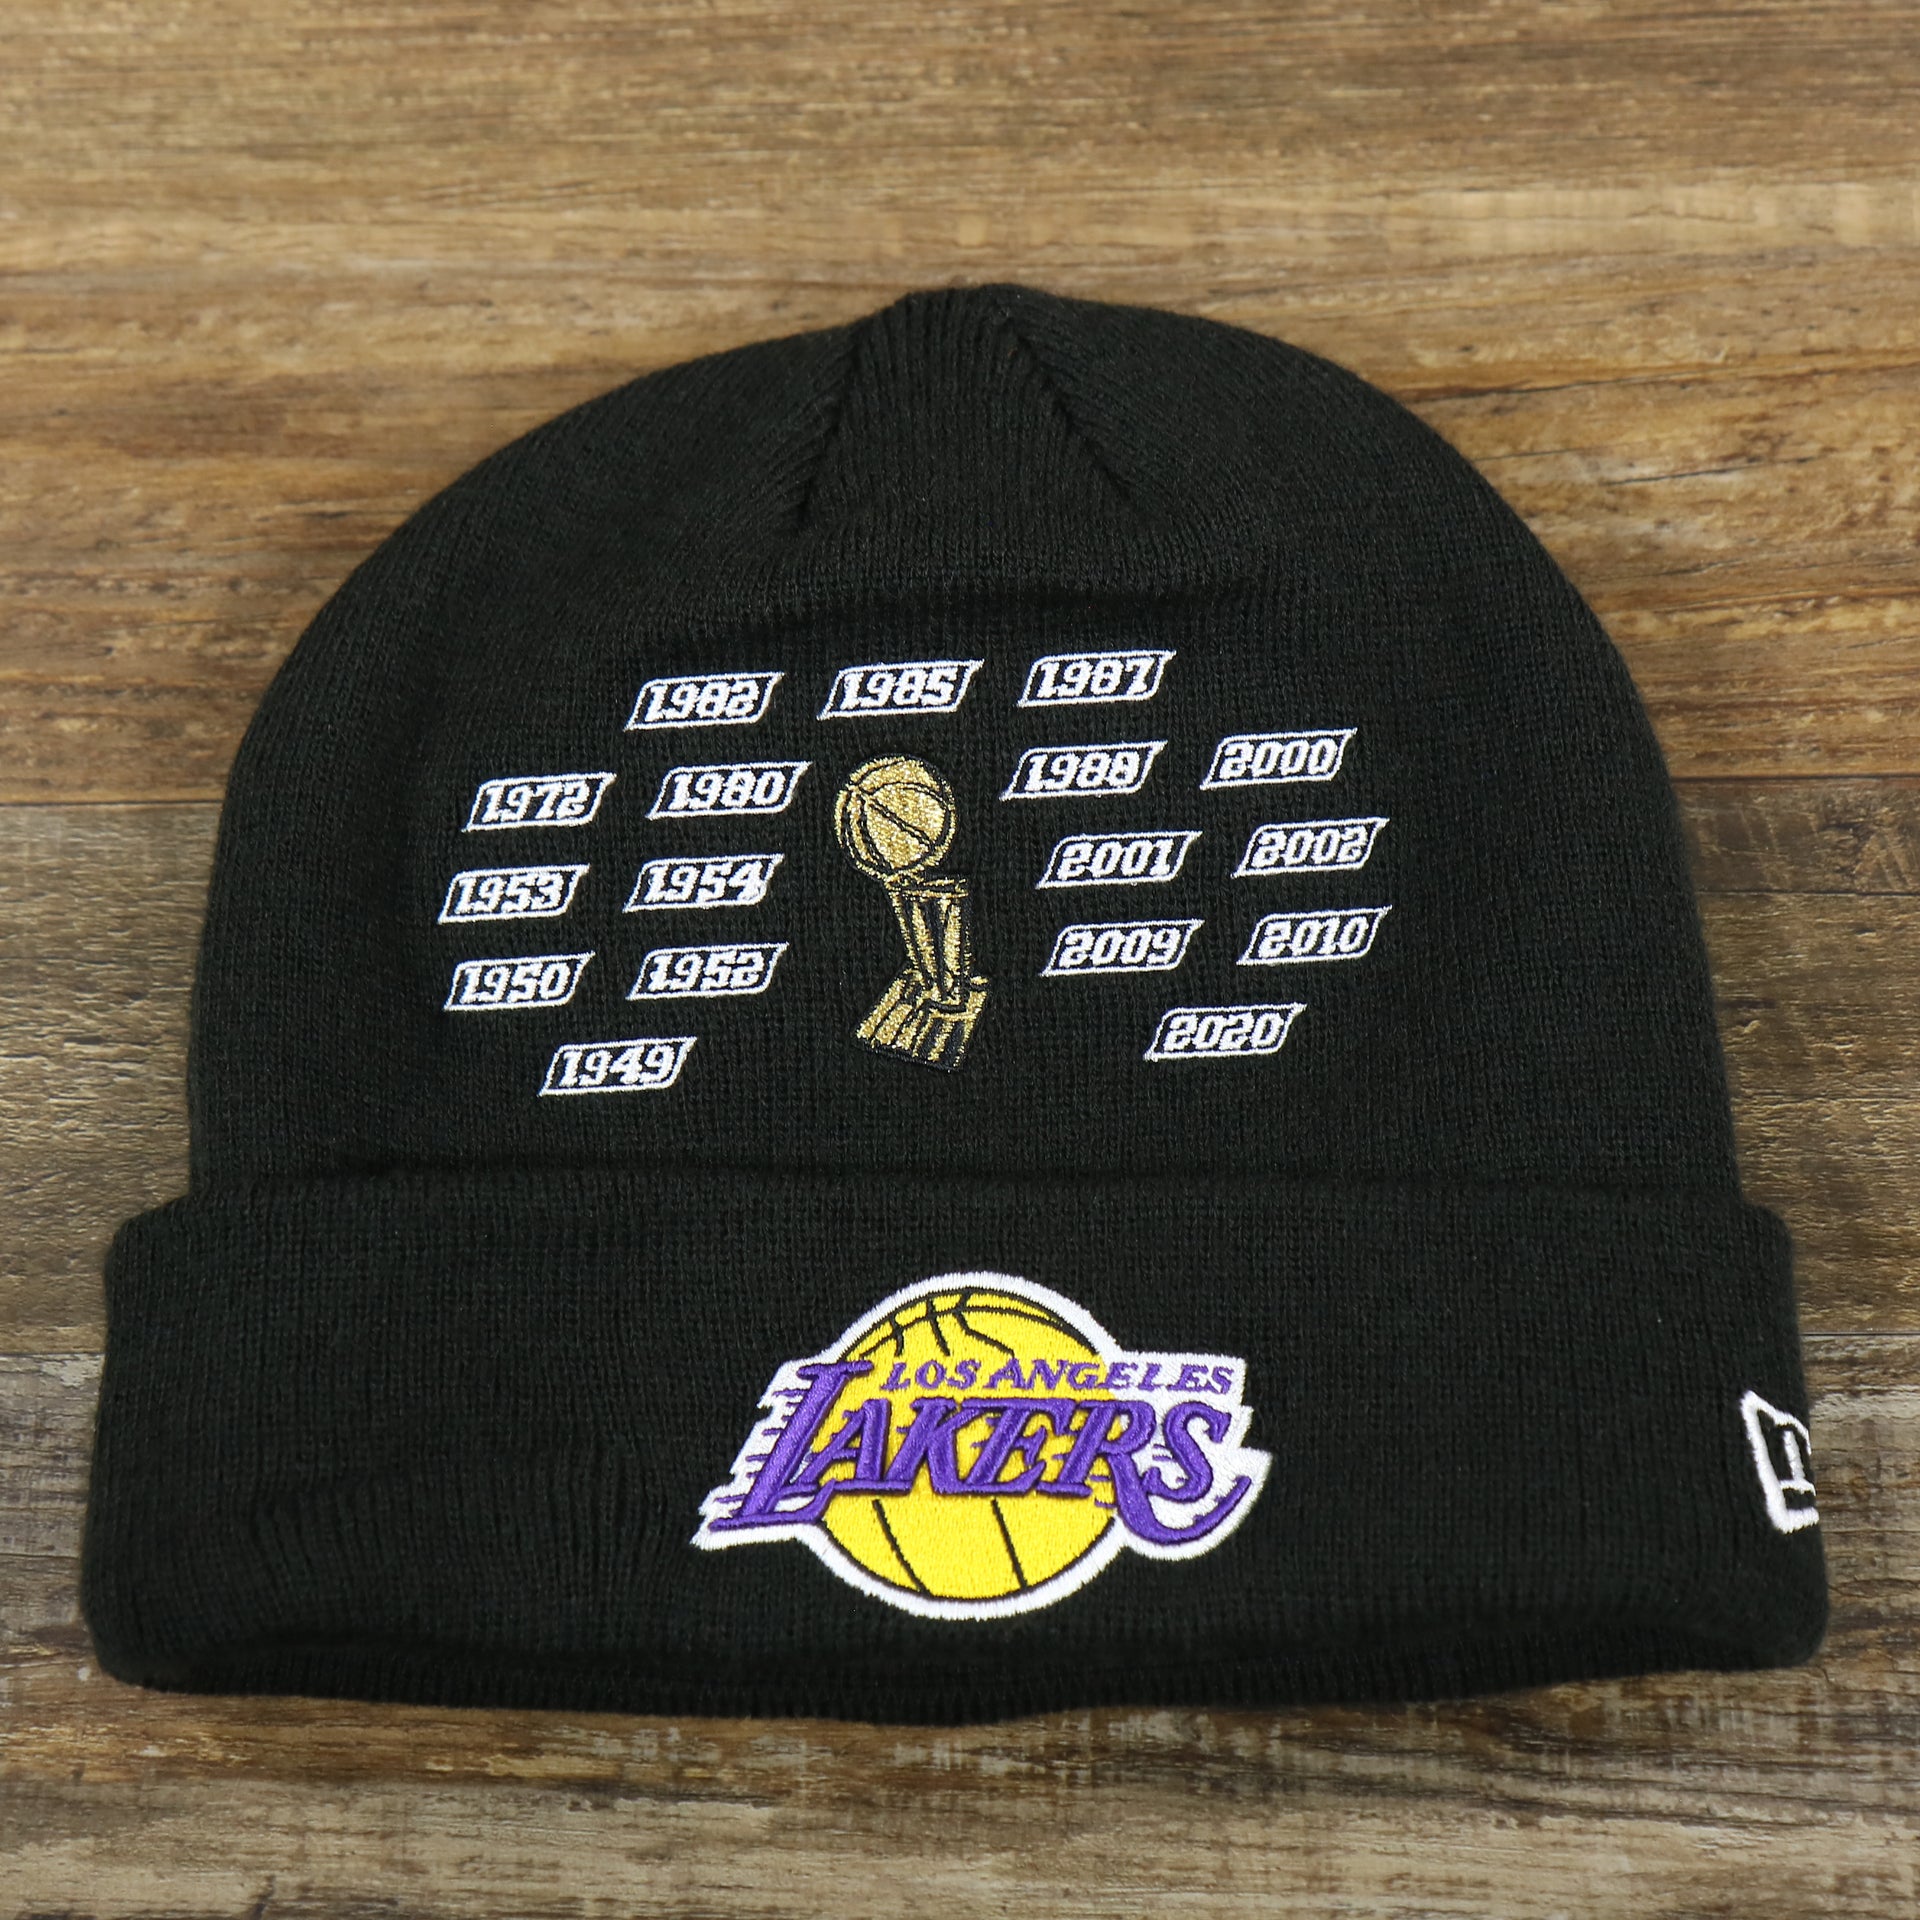 The front of the Los Angeles Lakers All Over NBA Finals Side Patch 17x Champion Knit Cuff Beanie | New Era, Black